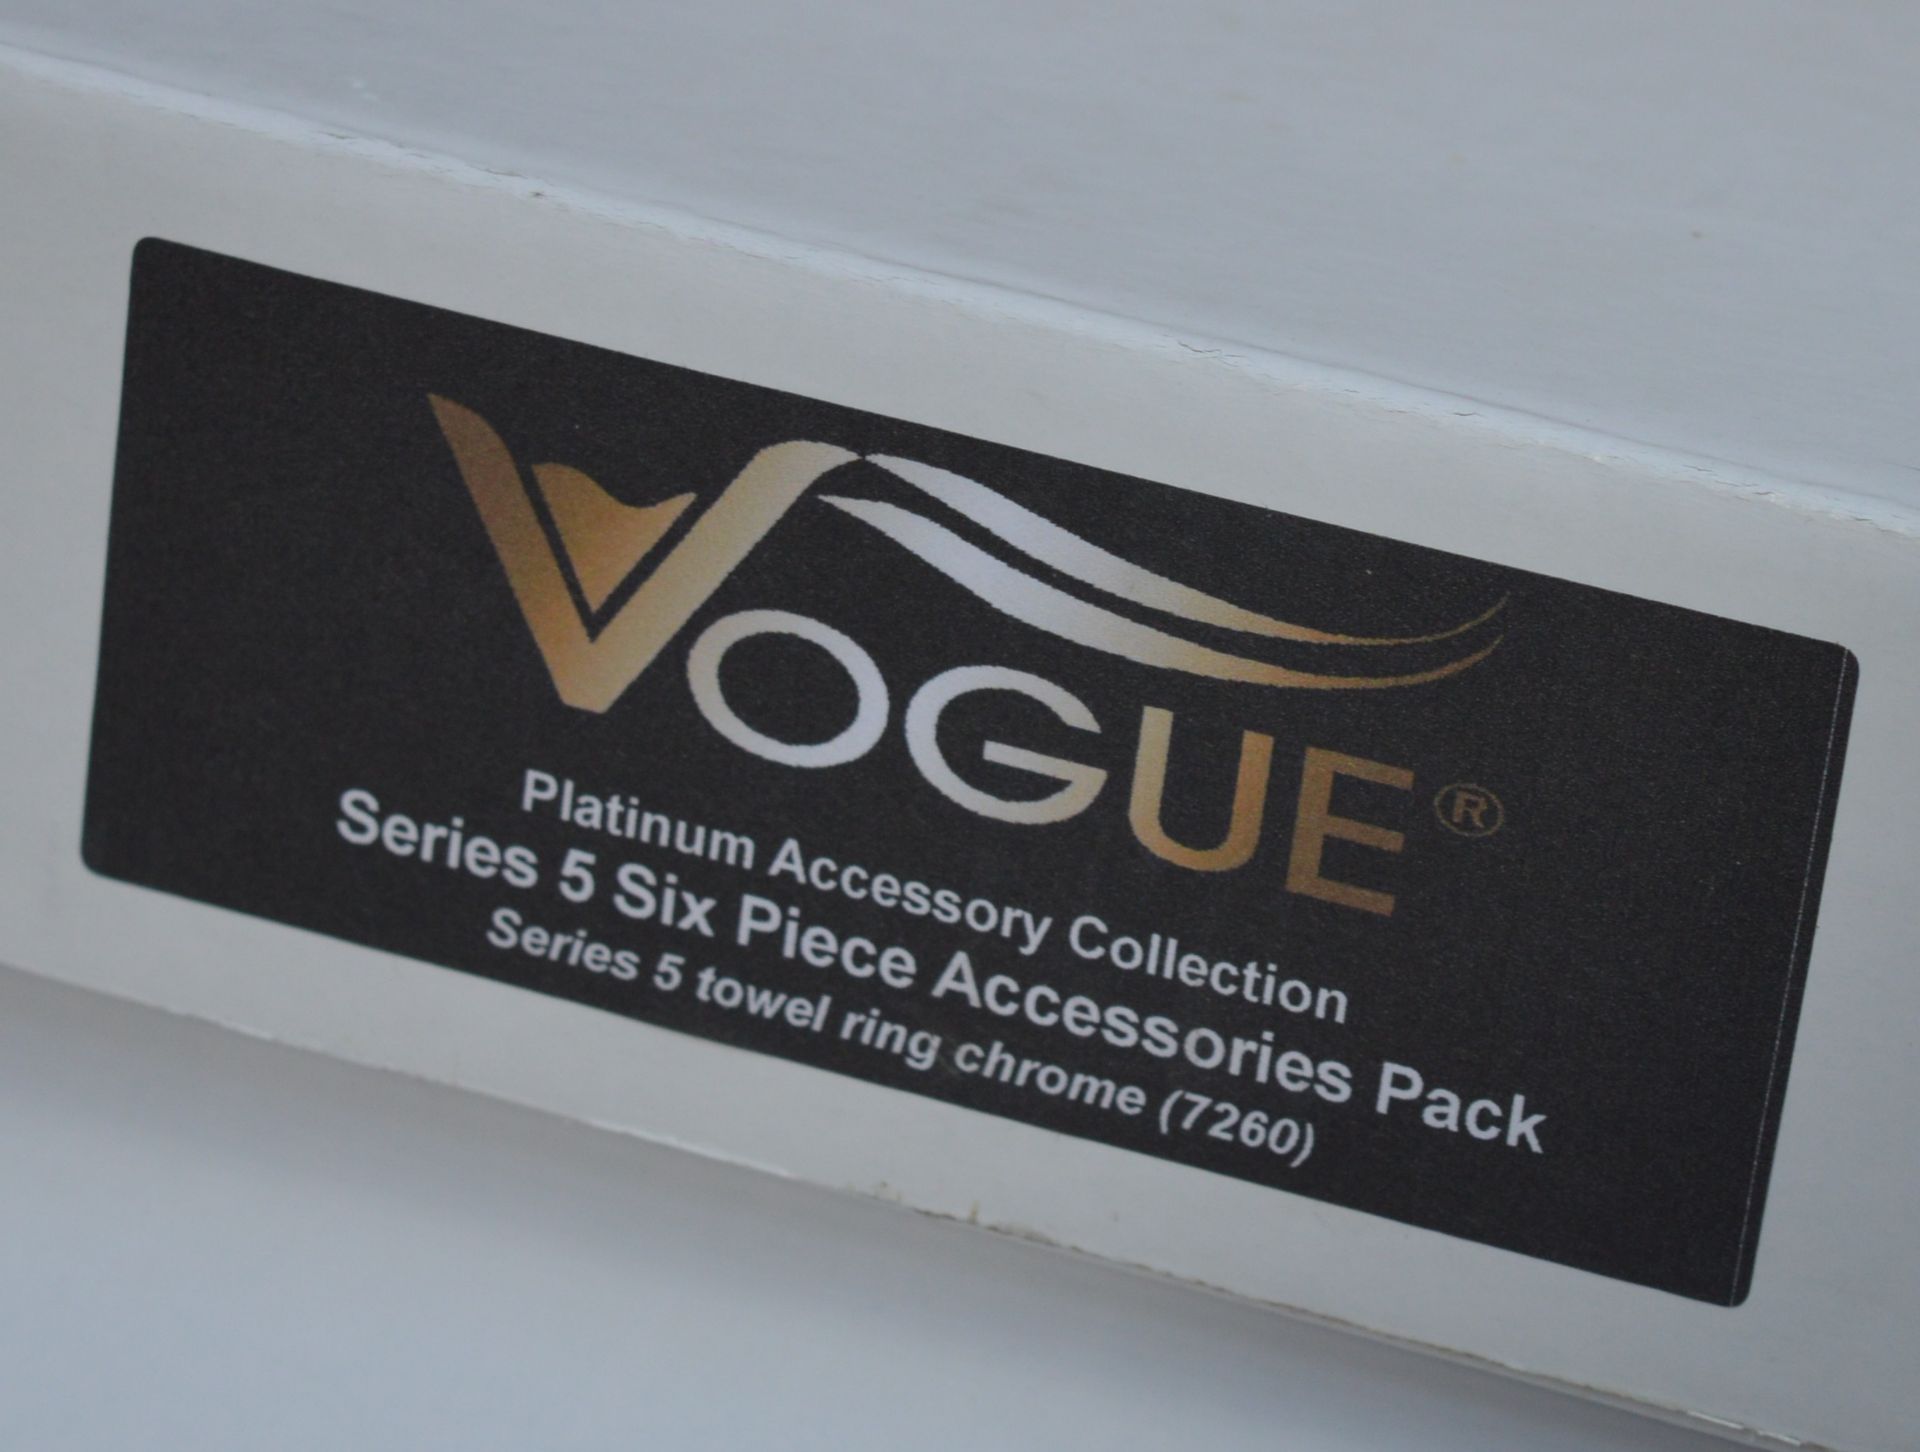 1 x Vogue Series 5 Six Piece Bathroom Accessory Set - Includes WC Roll Holder, Soap Dispenser, - Image 7 of 7